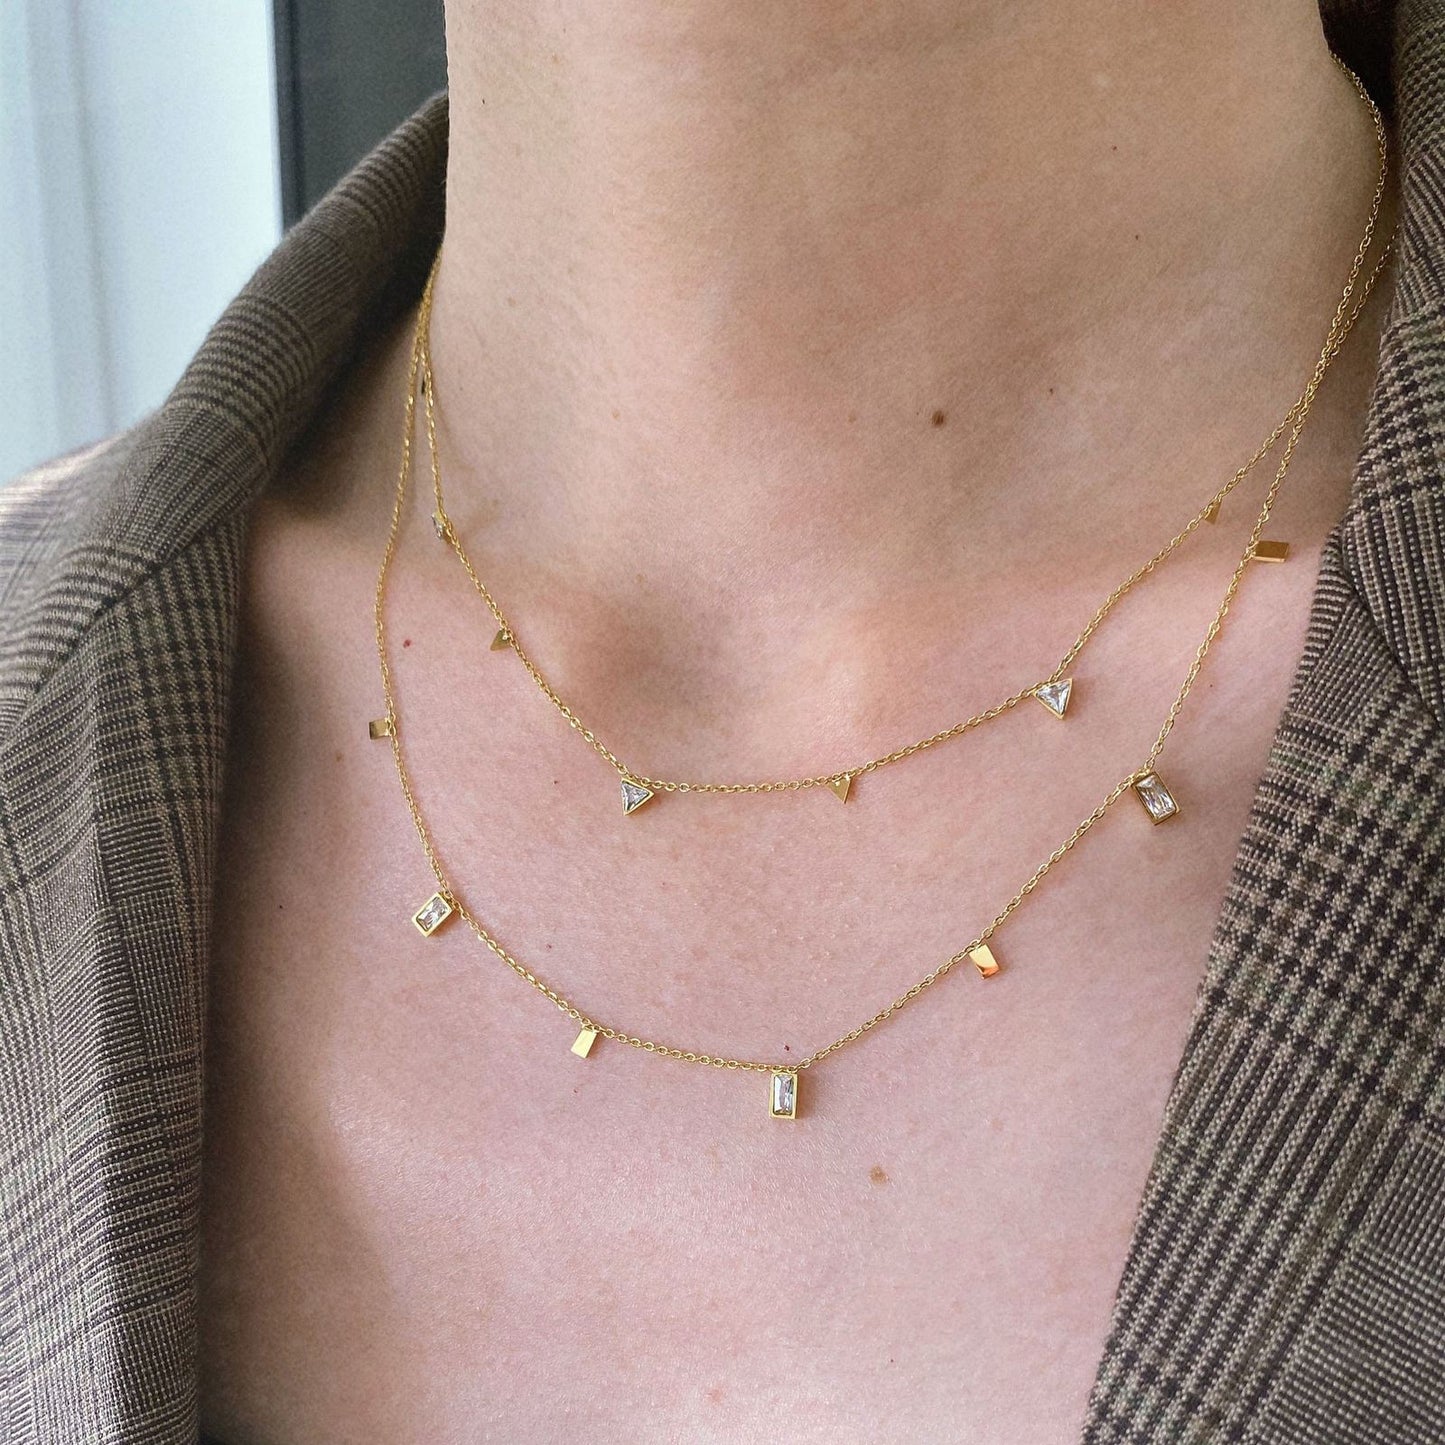 Reyna | 18k gold plated necklace - Ladywithcraft